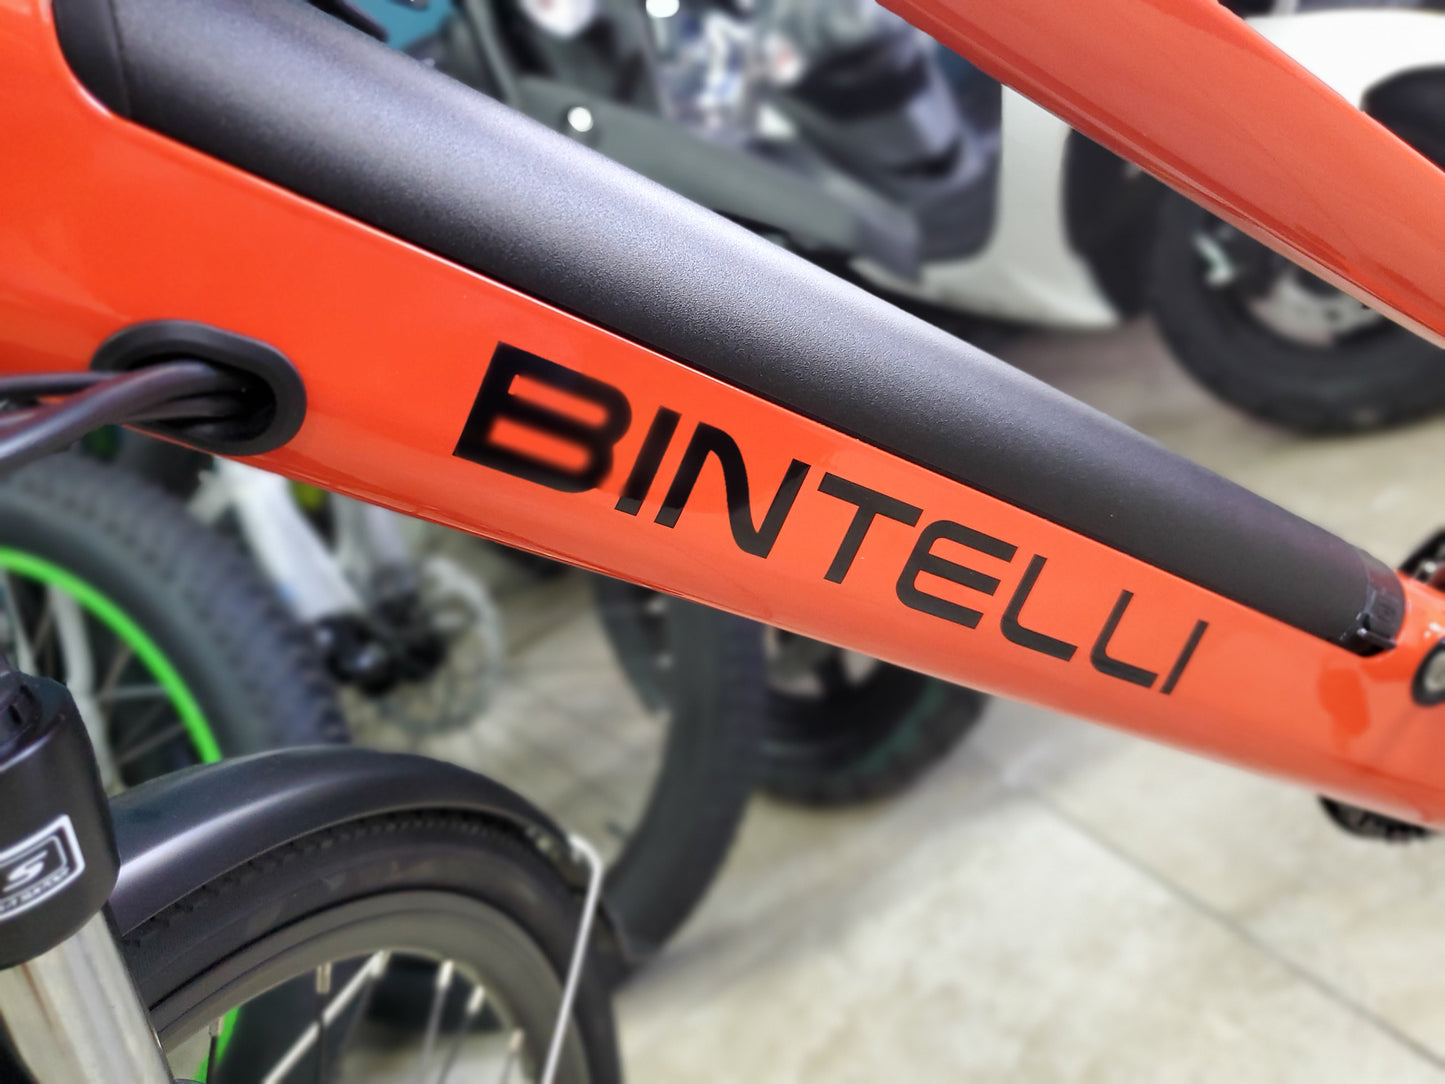 BINTELLI B2 ELECTRIC BICYCLE - Flame - See it in Store Today